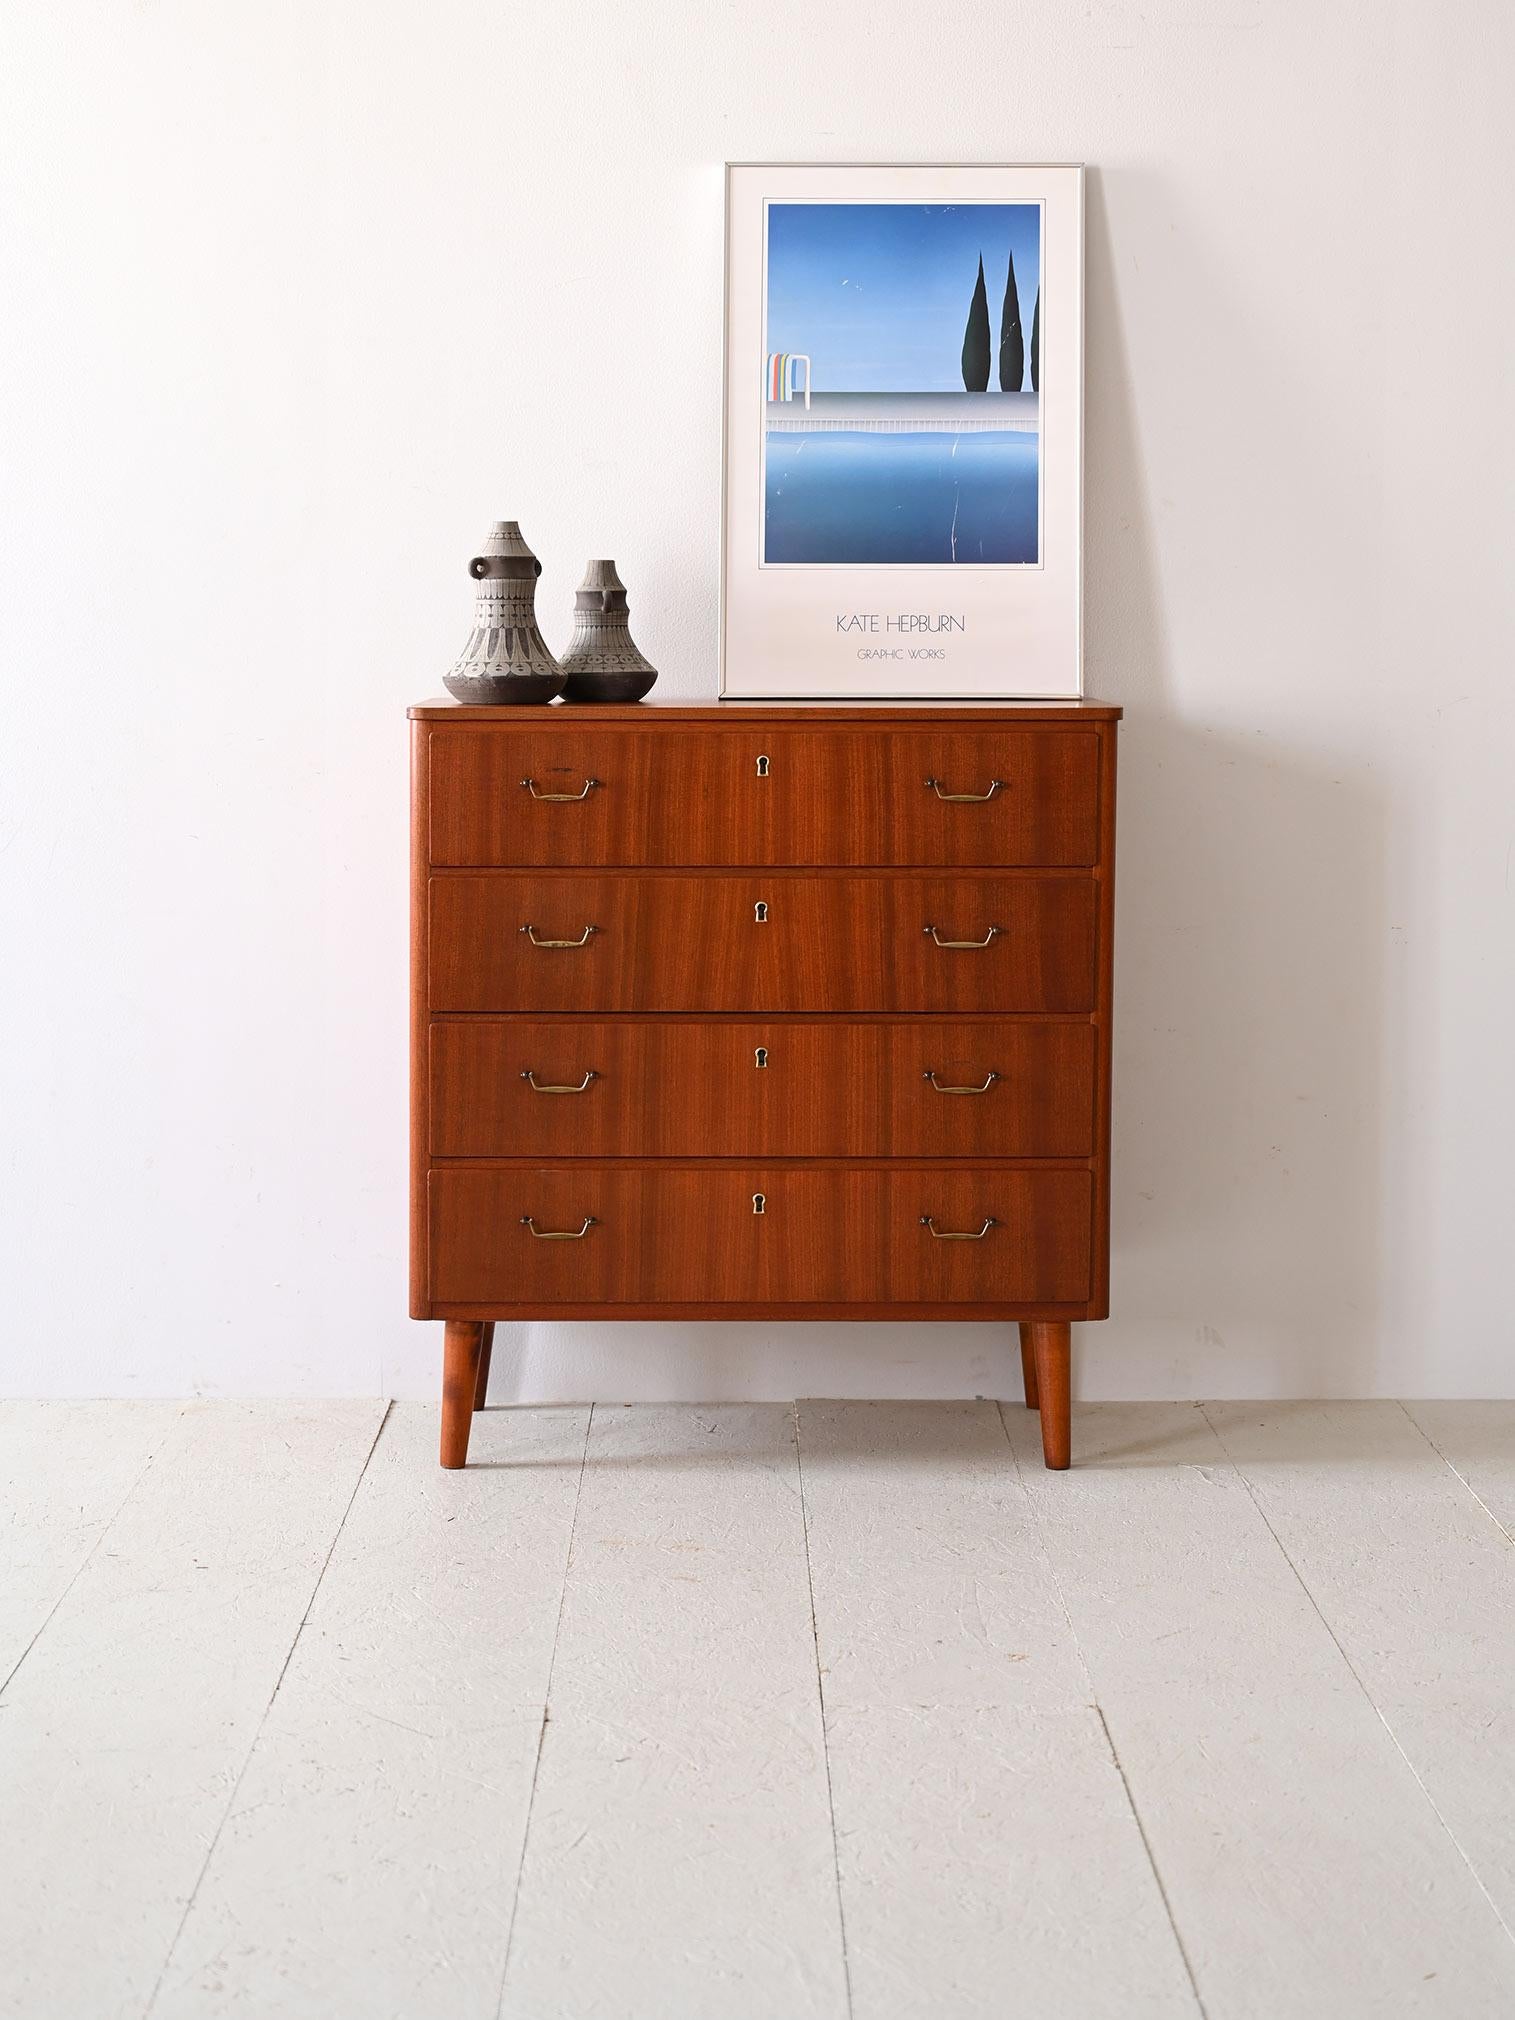 Scandinavian cabinet with 4 drawers with golden metal handle.

Scandinavian craftsmanship is expressed in this 1960s chest of drawers, with its refined design and functional metal handles. The bold tone of the wood is enhanced by the golden details